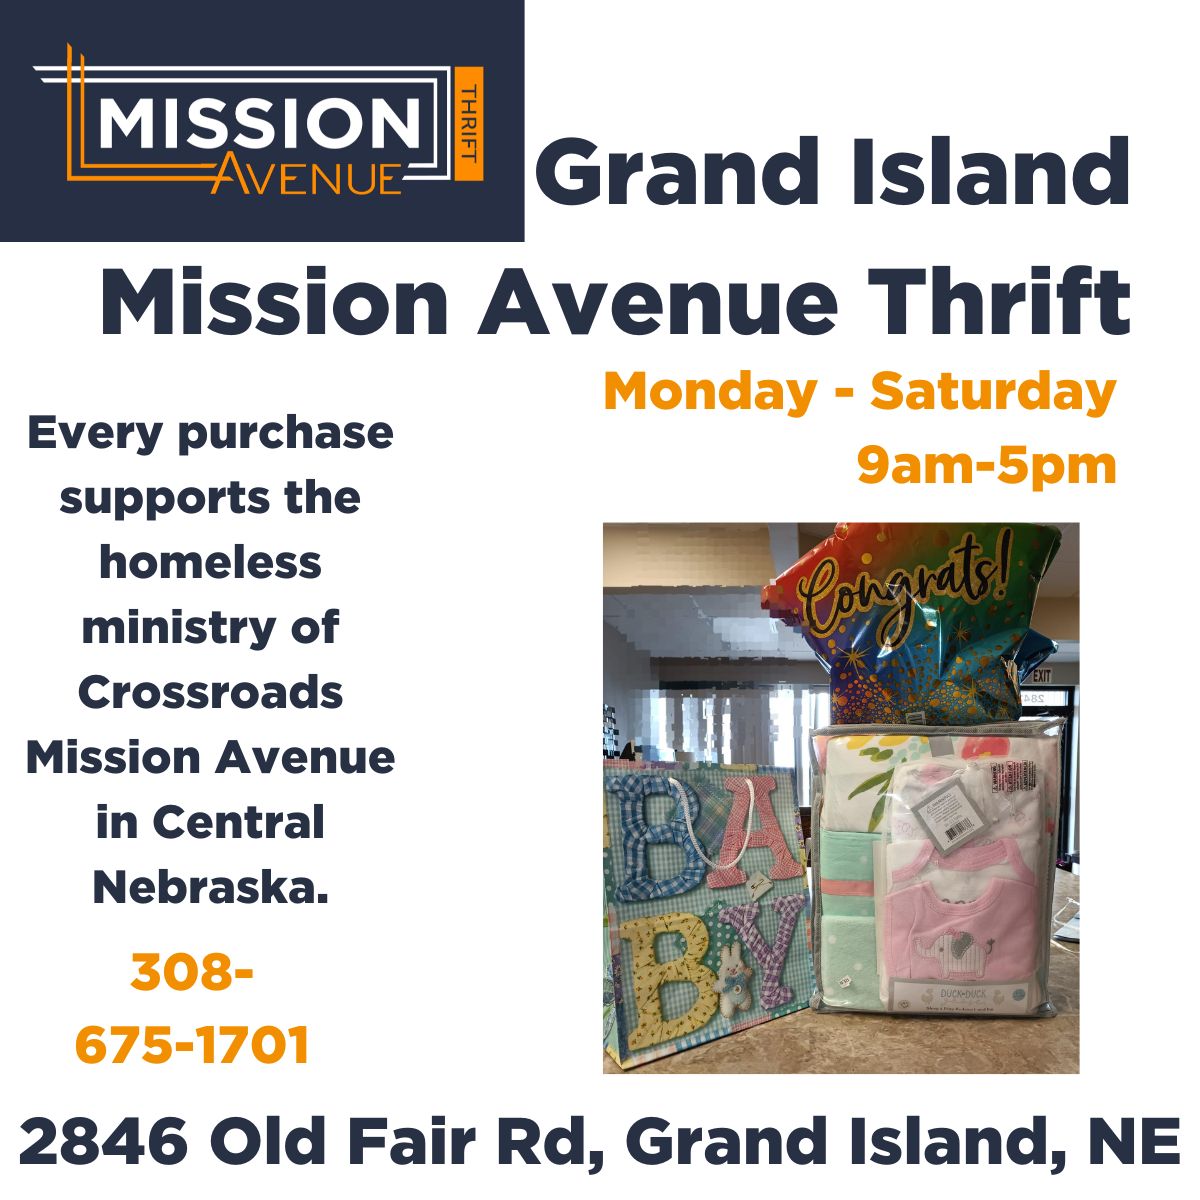 Come in TODAY and see what's NEW at Grand Island Mission Avenue Thrift! crossroadsmission.com/thrift-stores/ #MissionAvenueThrift #GrandIslandNebraska #Thriftstore #Shoptoday